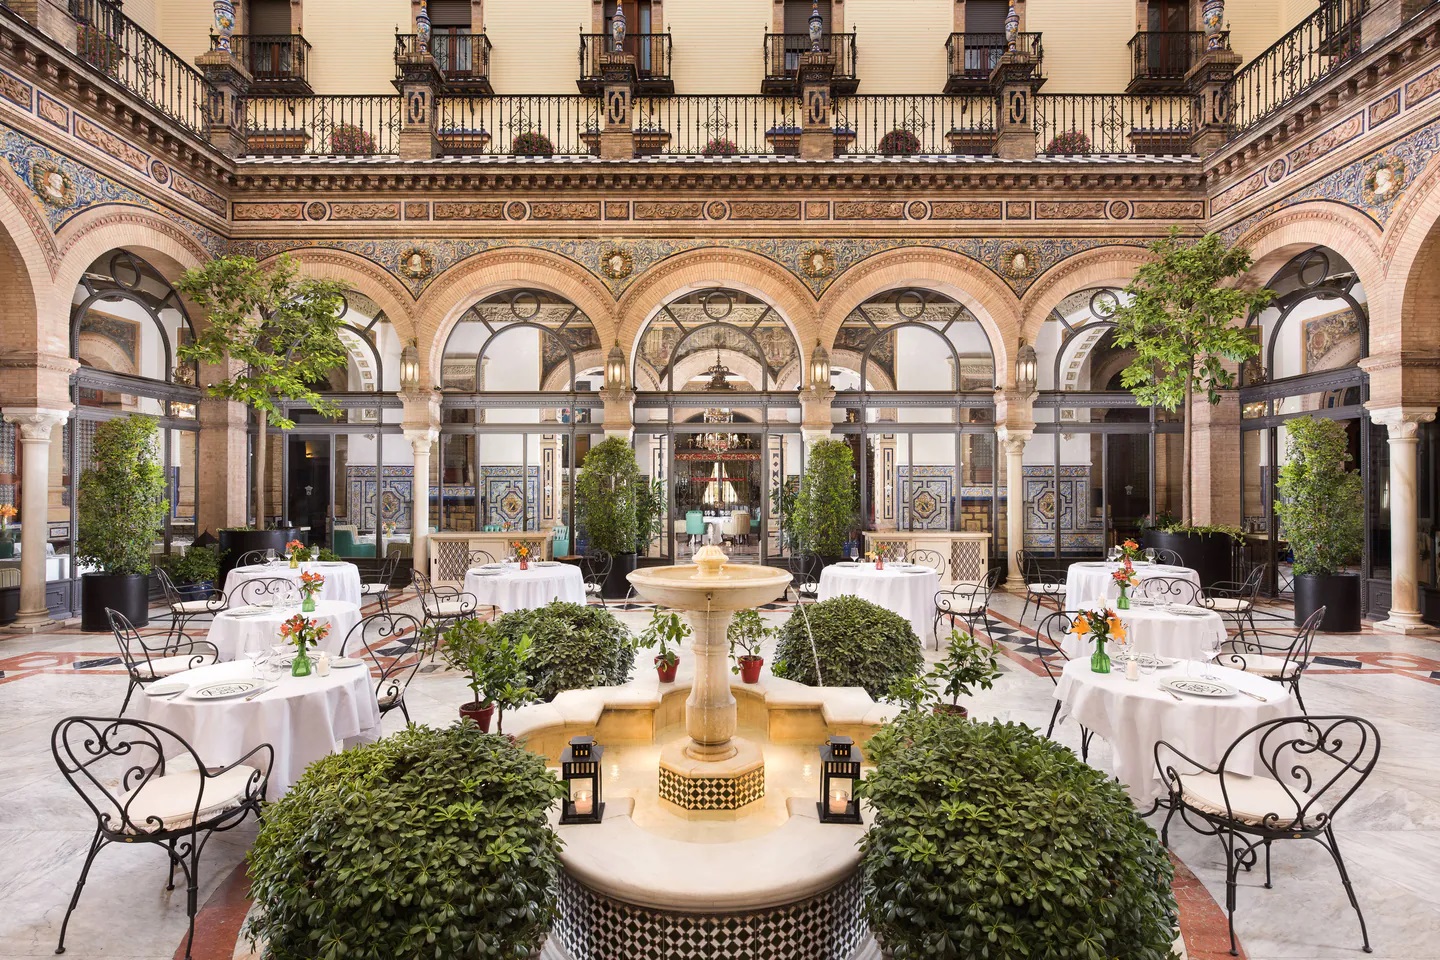 Bright central courtyard and fountain at Hotel Alfonso XIII Seville